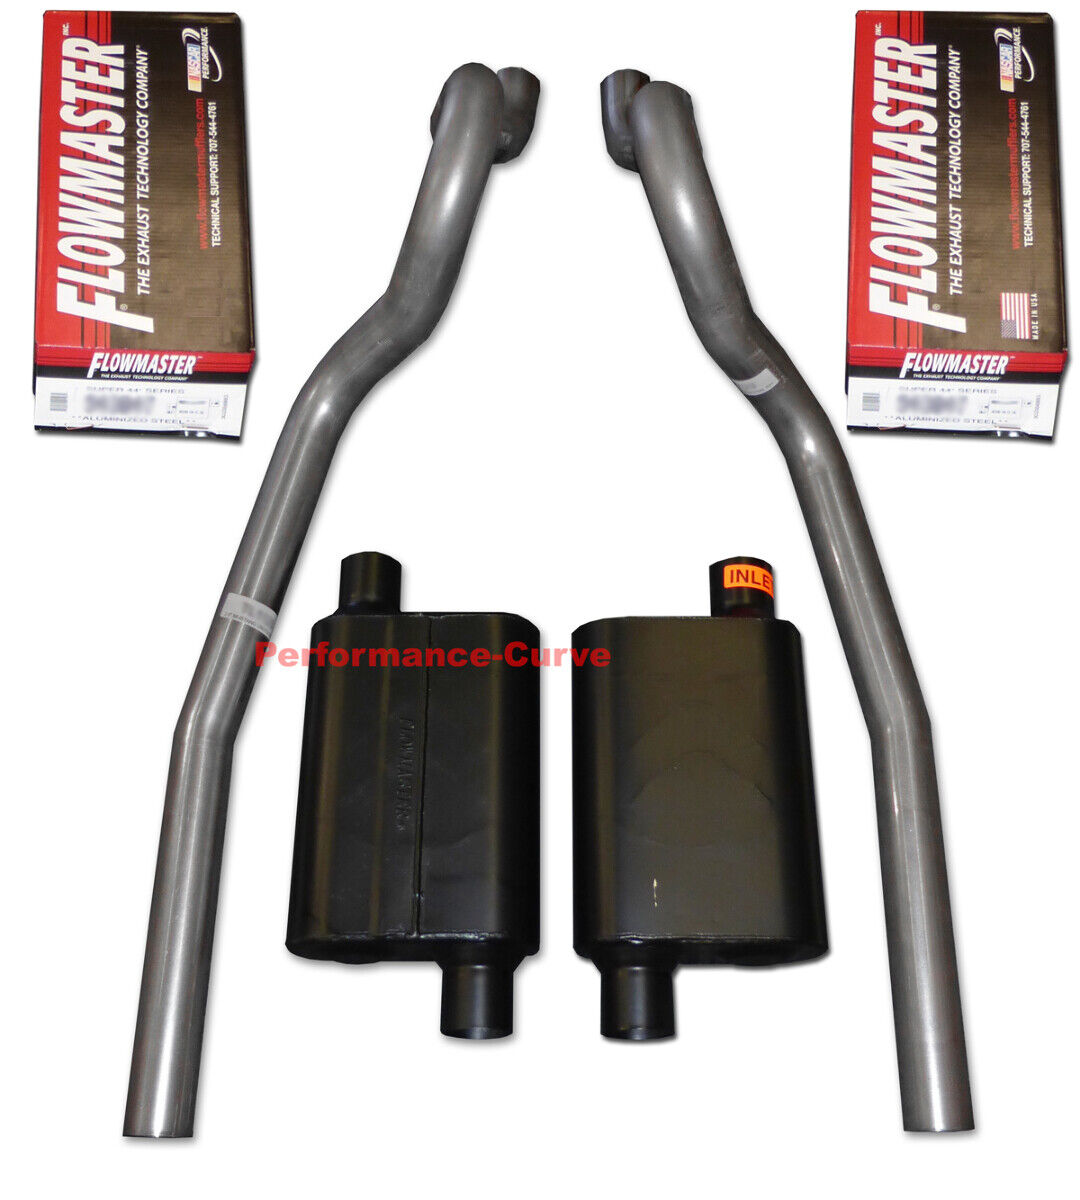 86-04 Ford Mustang GT Exhaust System w/ Flowmaster Super 44 Mufflers